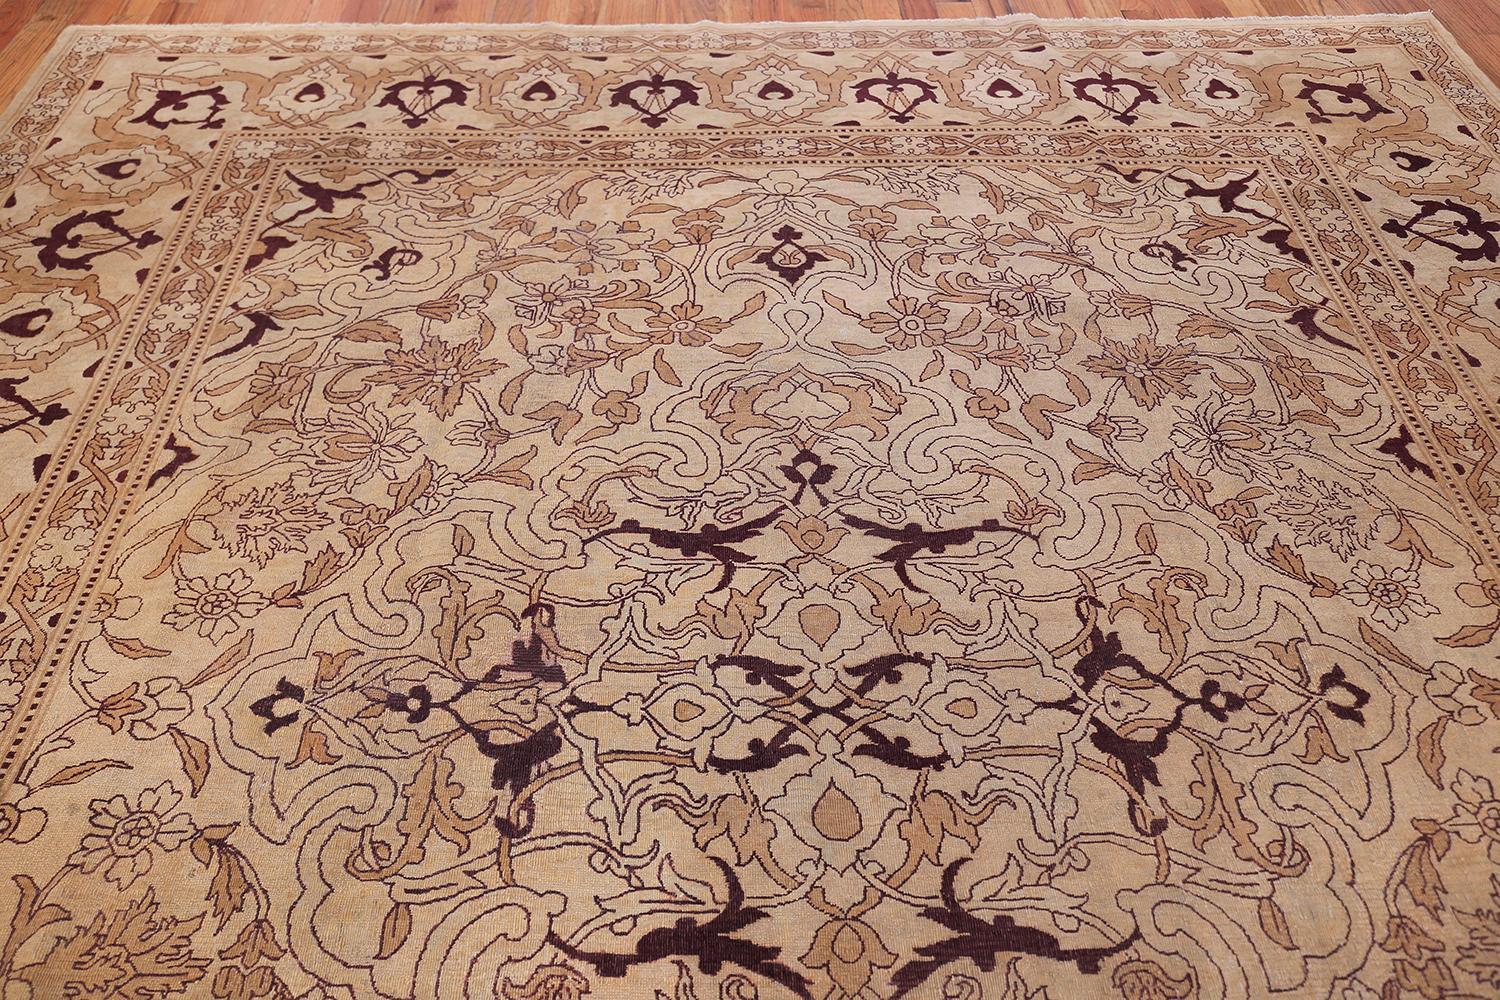 20th Century Ivory Antique Indian Amritsar Rug. Size: 9 ft 7 in x 11 ft 6 in